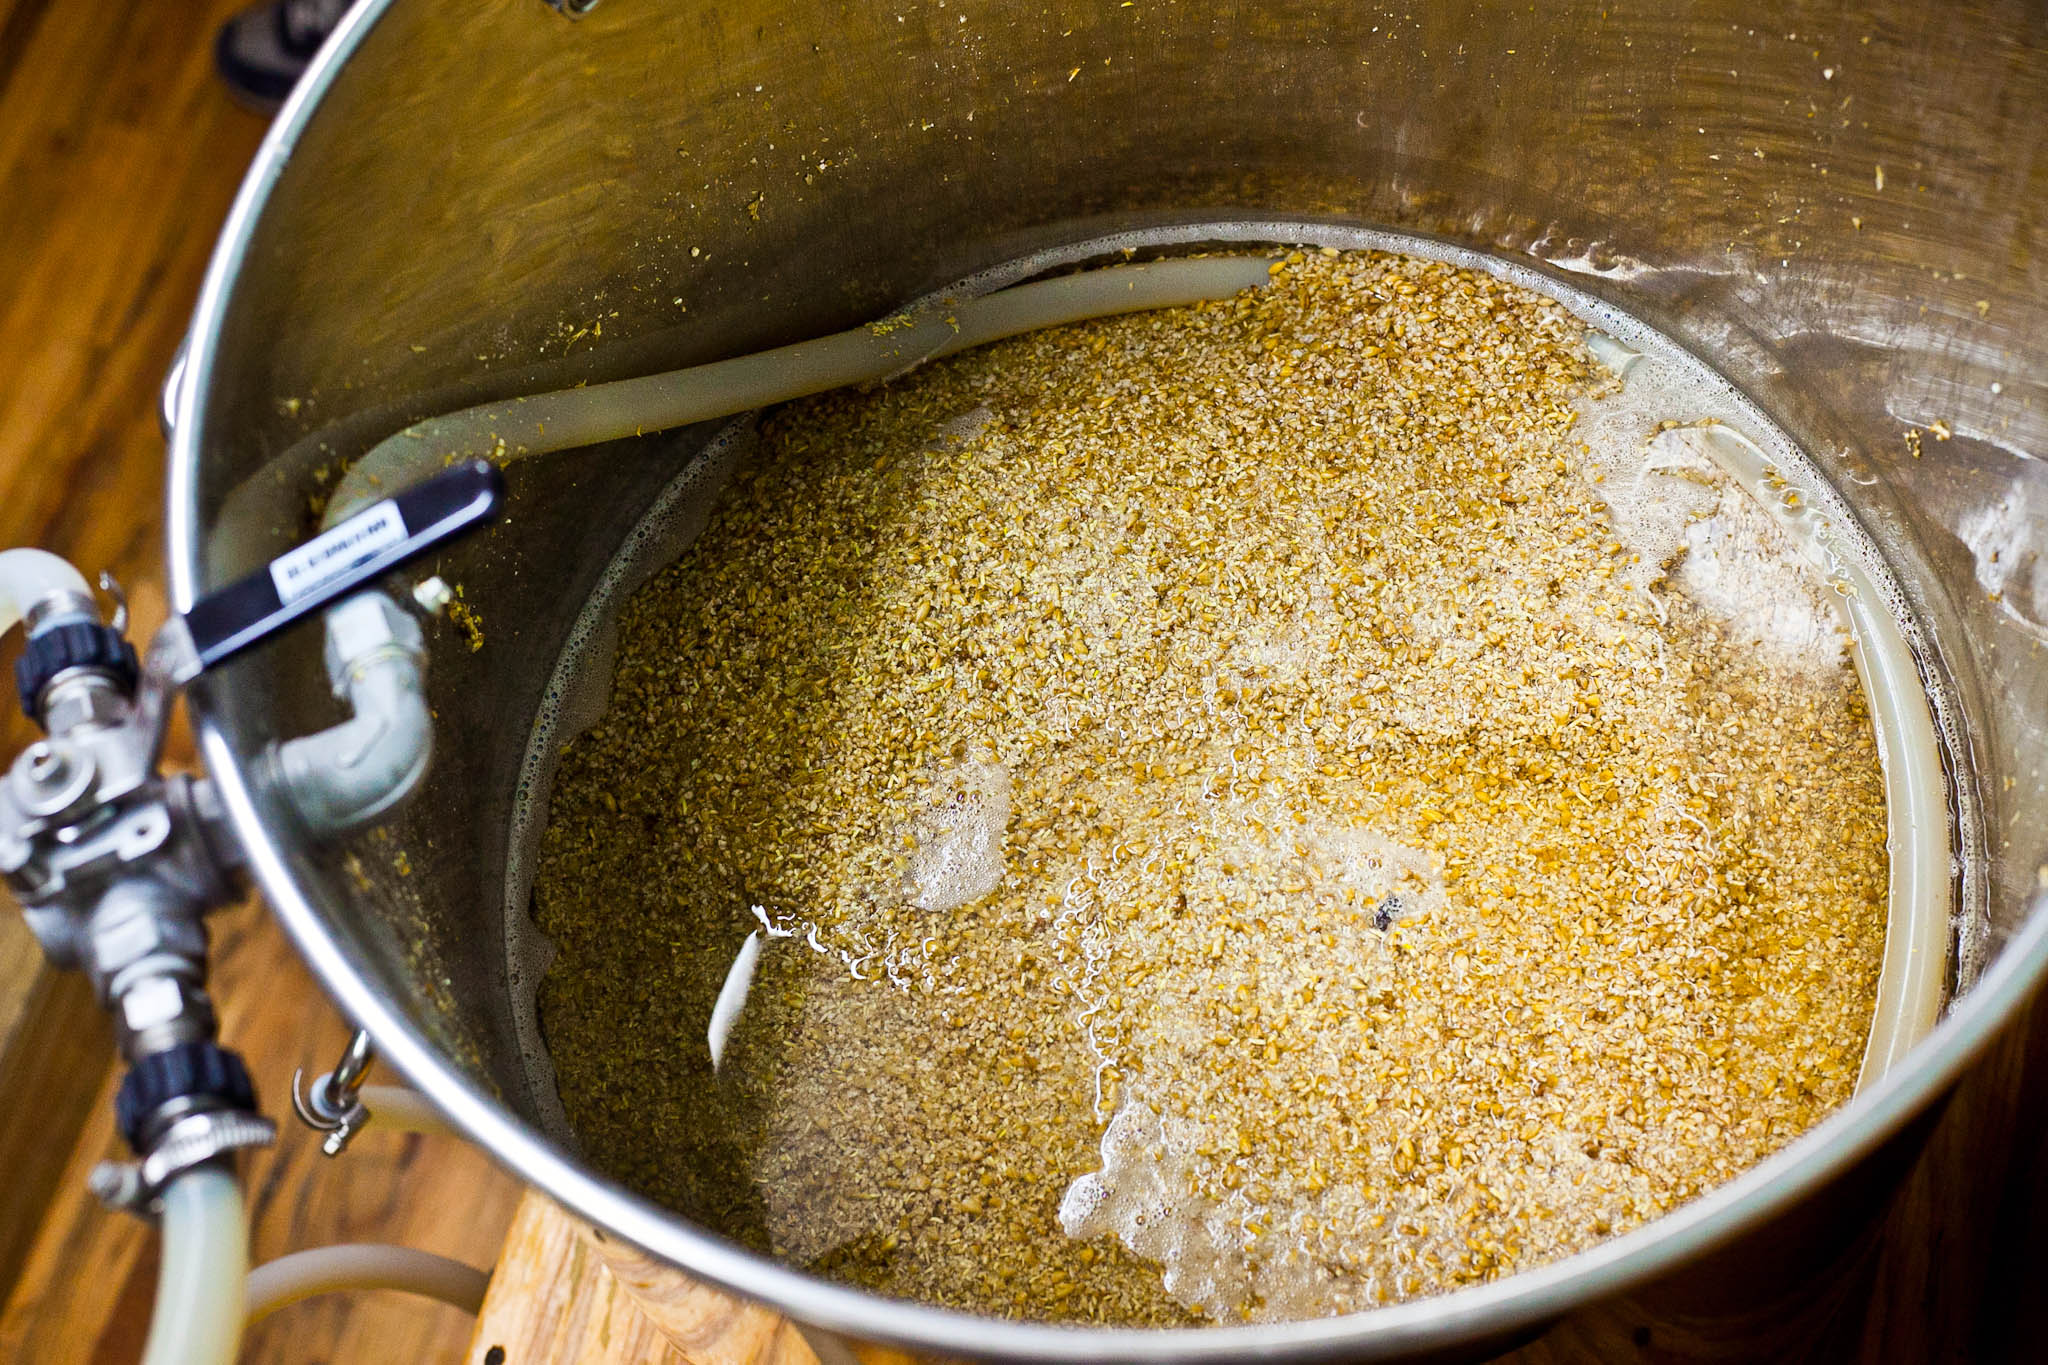 A picture of malt being converted to wort for brewing beer.